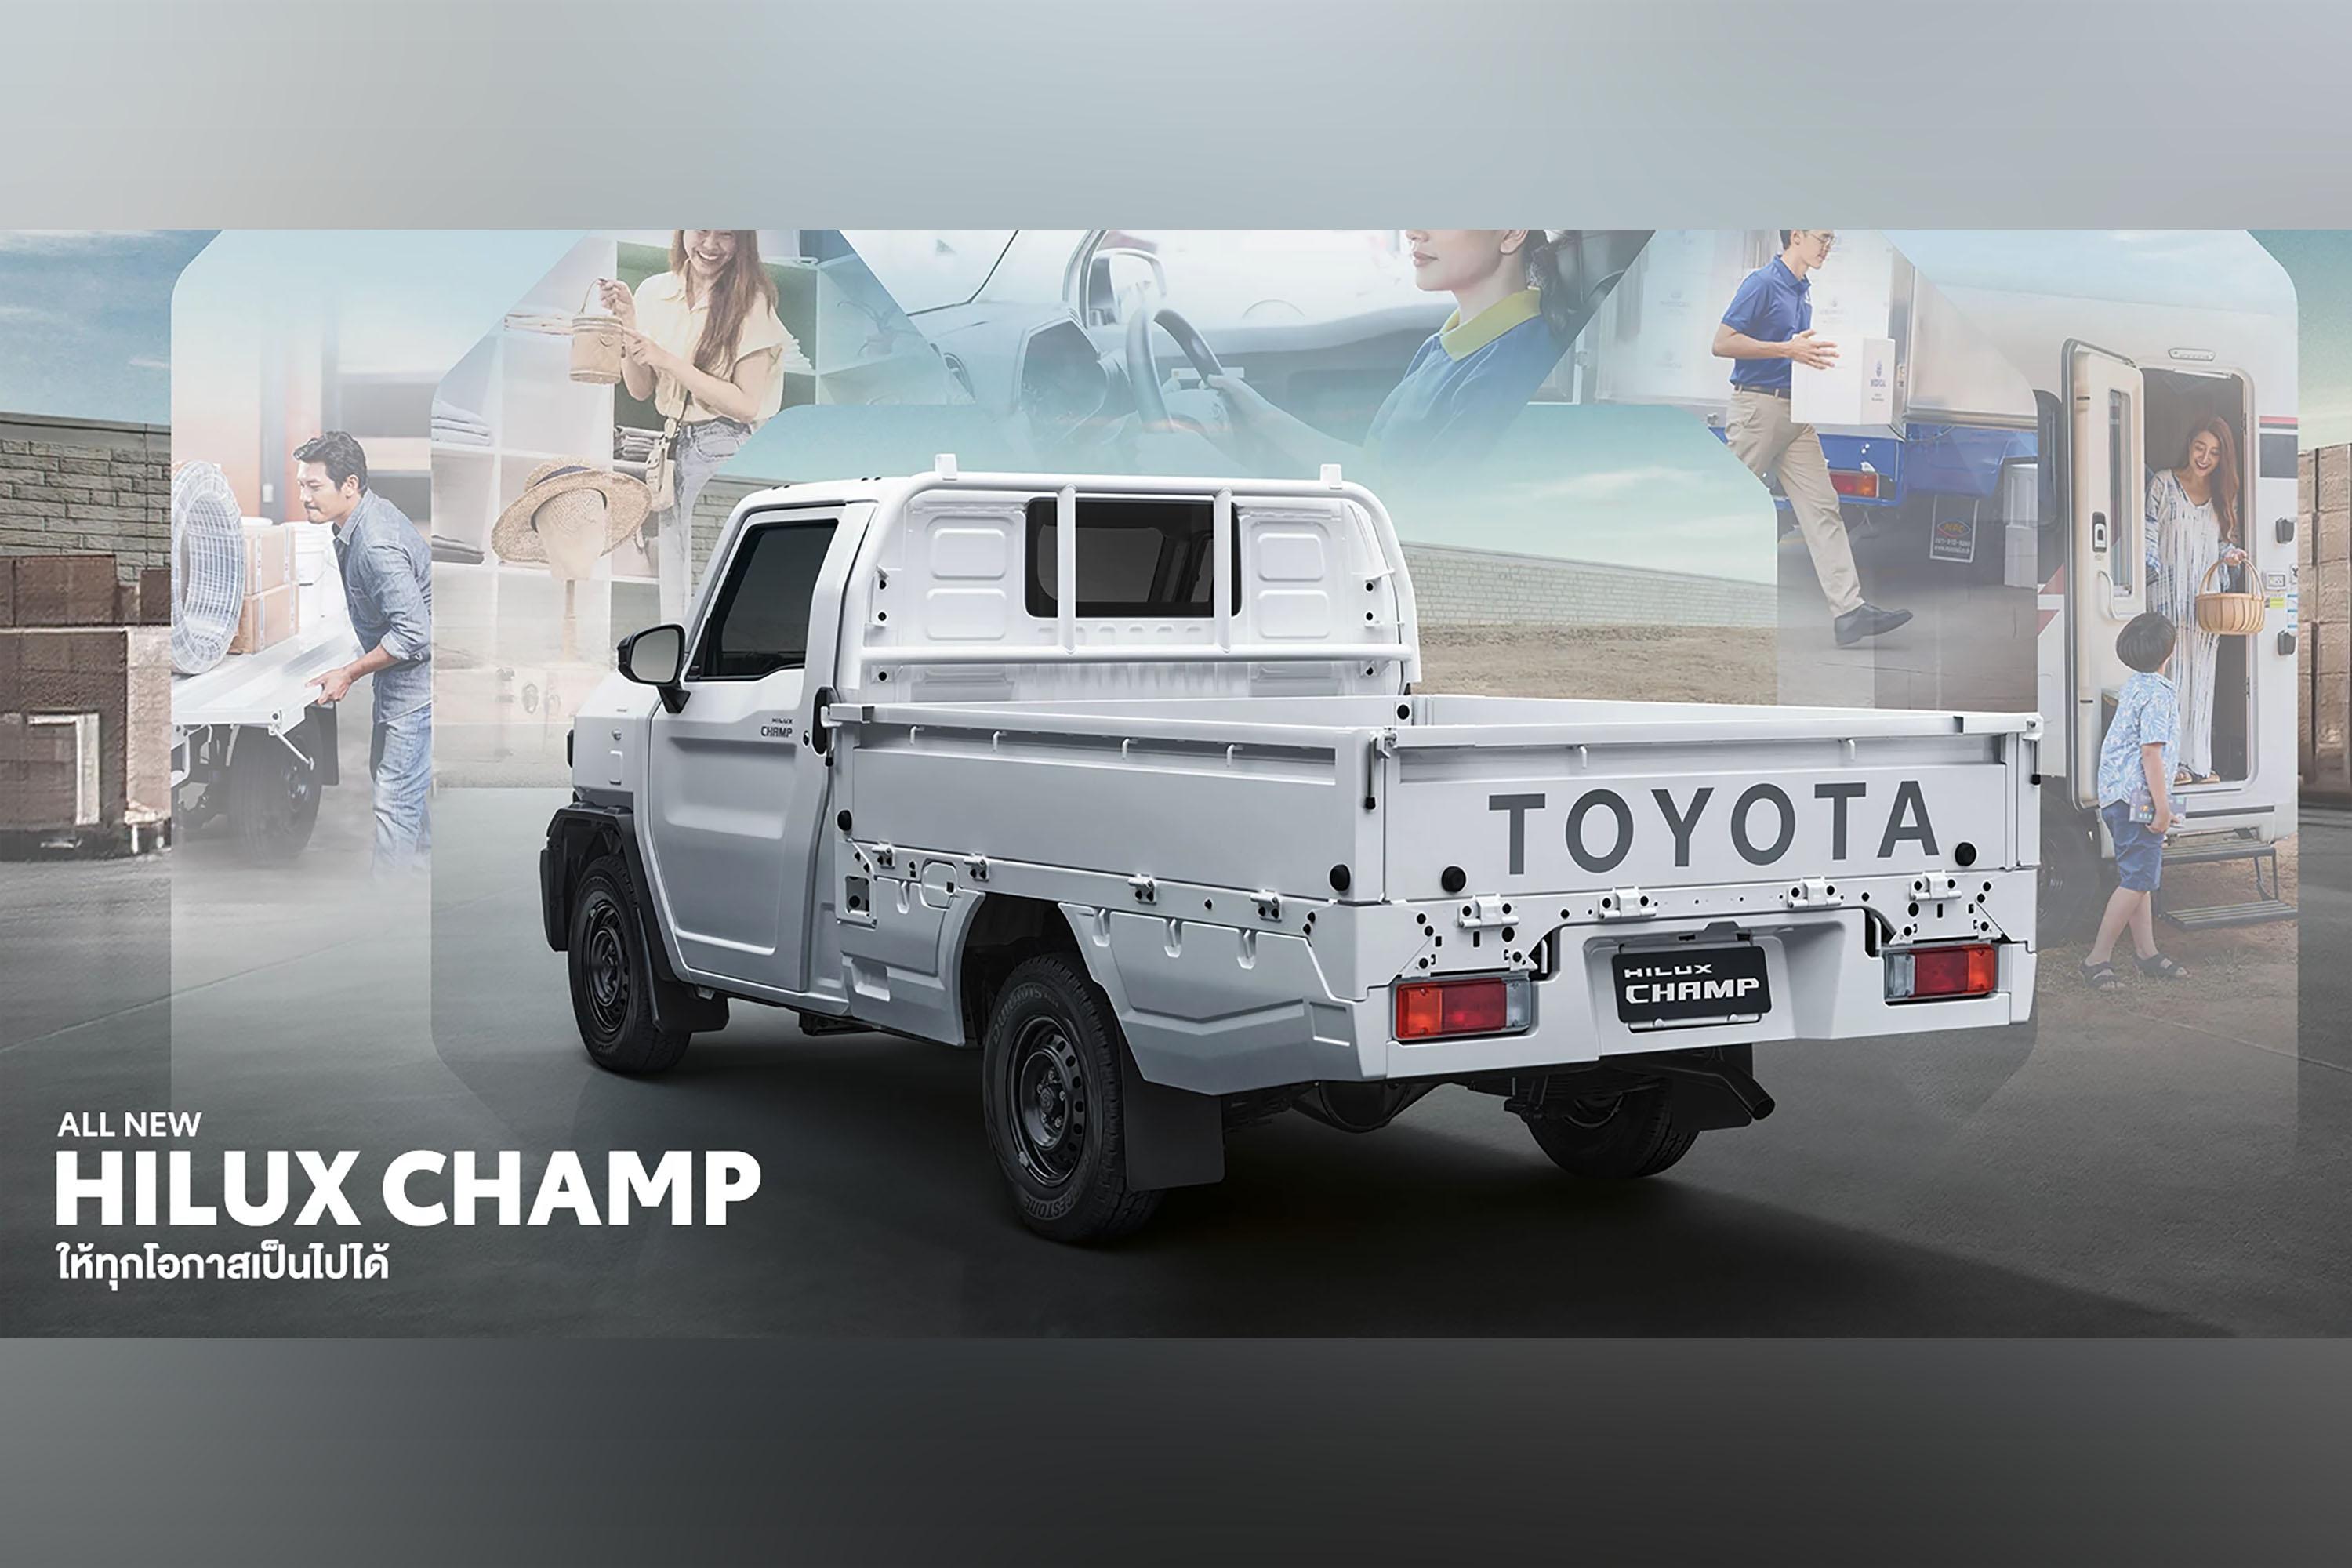 toyota hilux champ launched in thailand, starting from only $20k